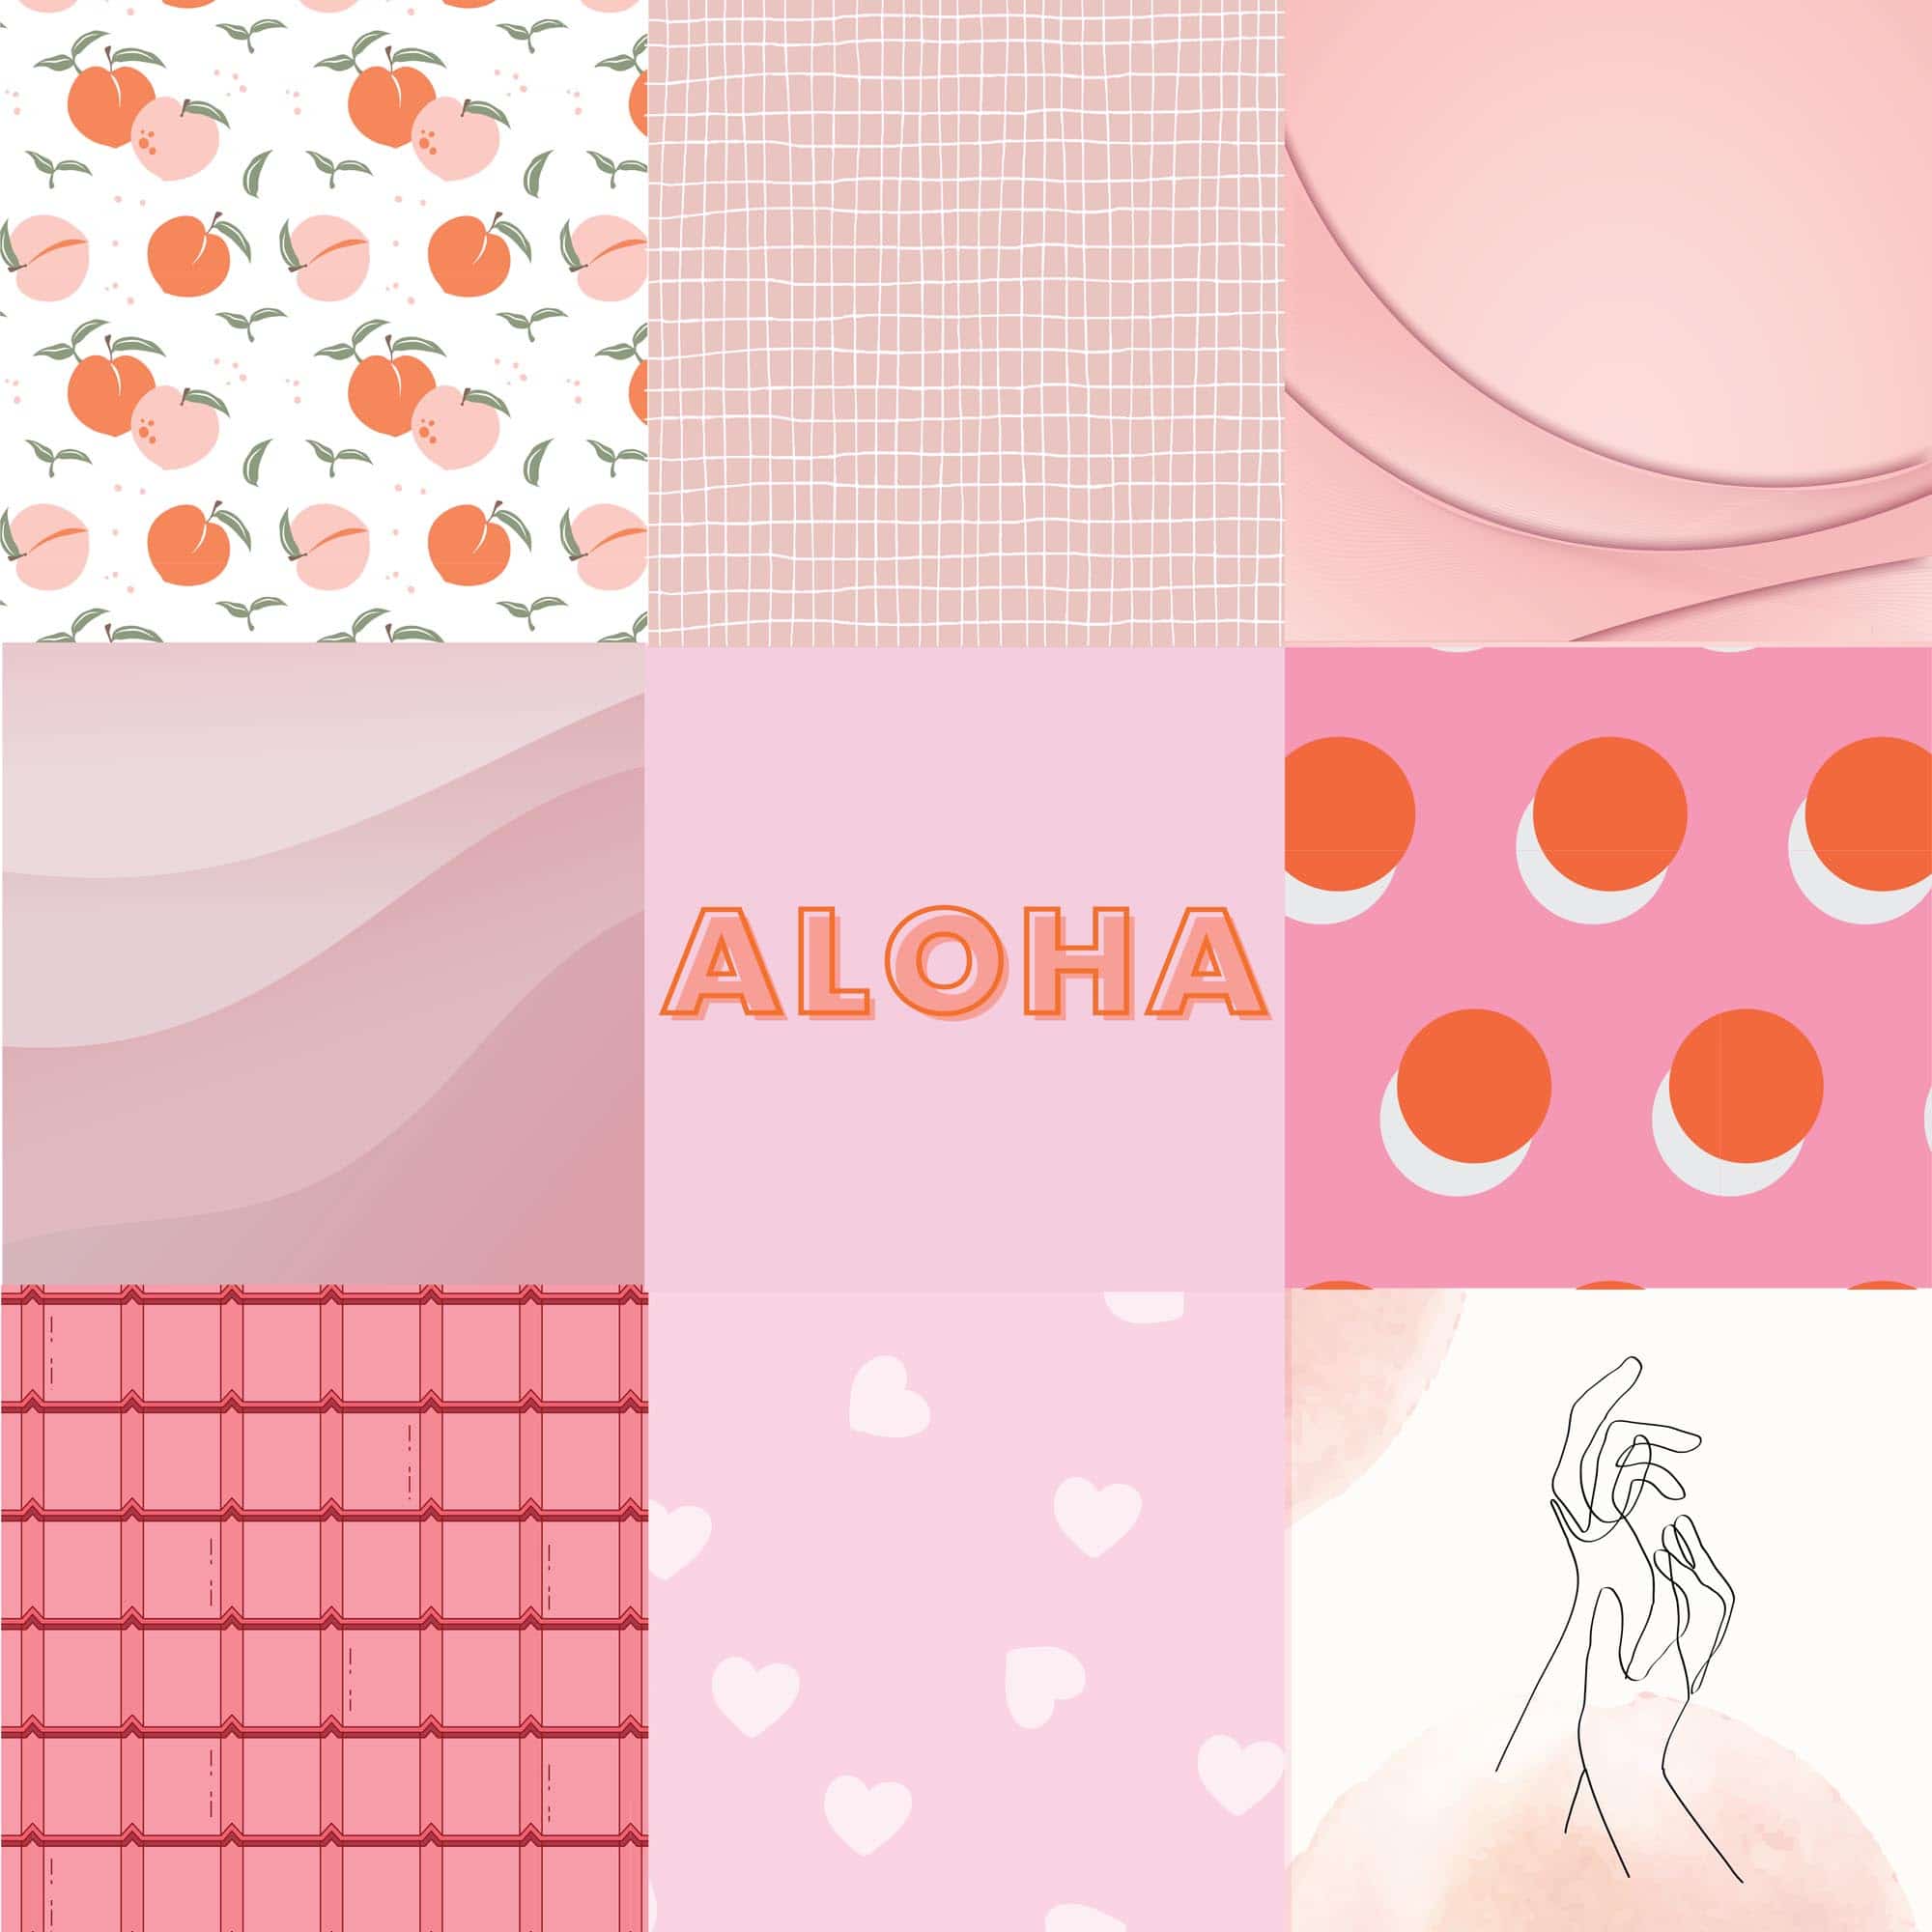 A collage of pink and orange images including peaches, hearts, and hands. - Pink collage